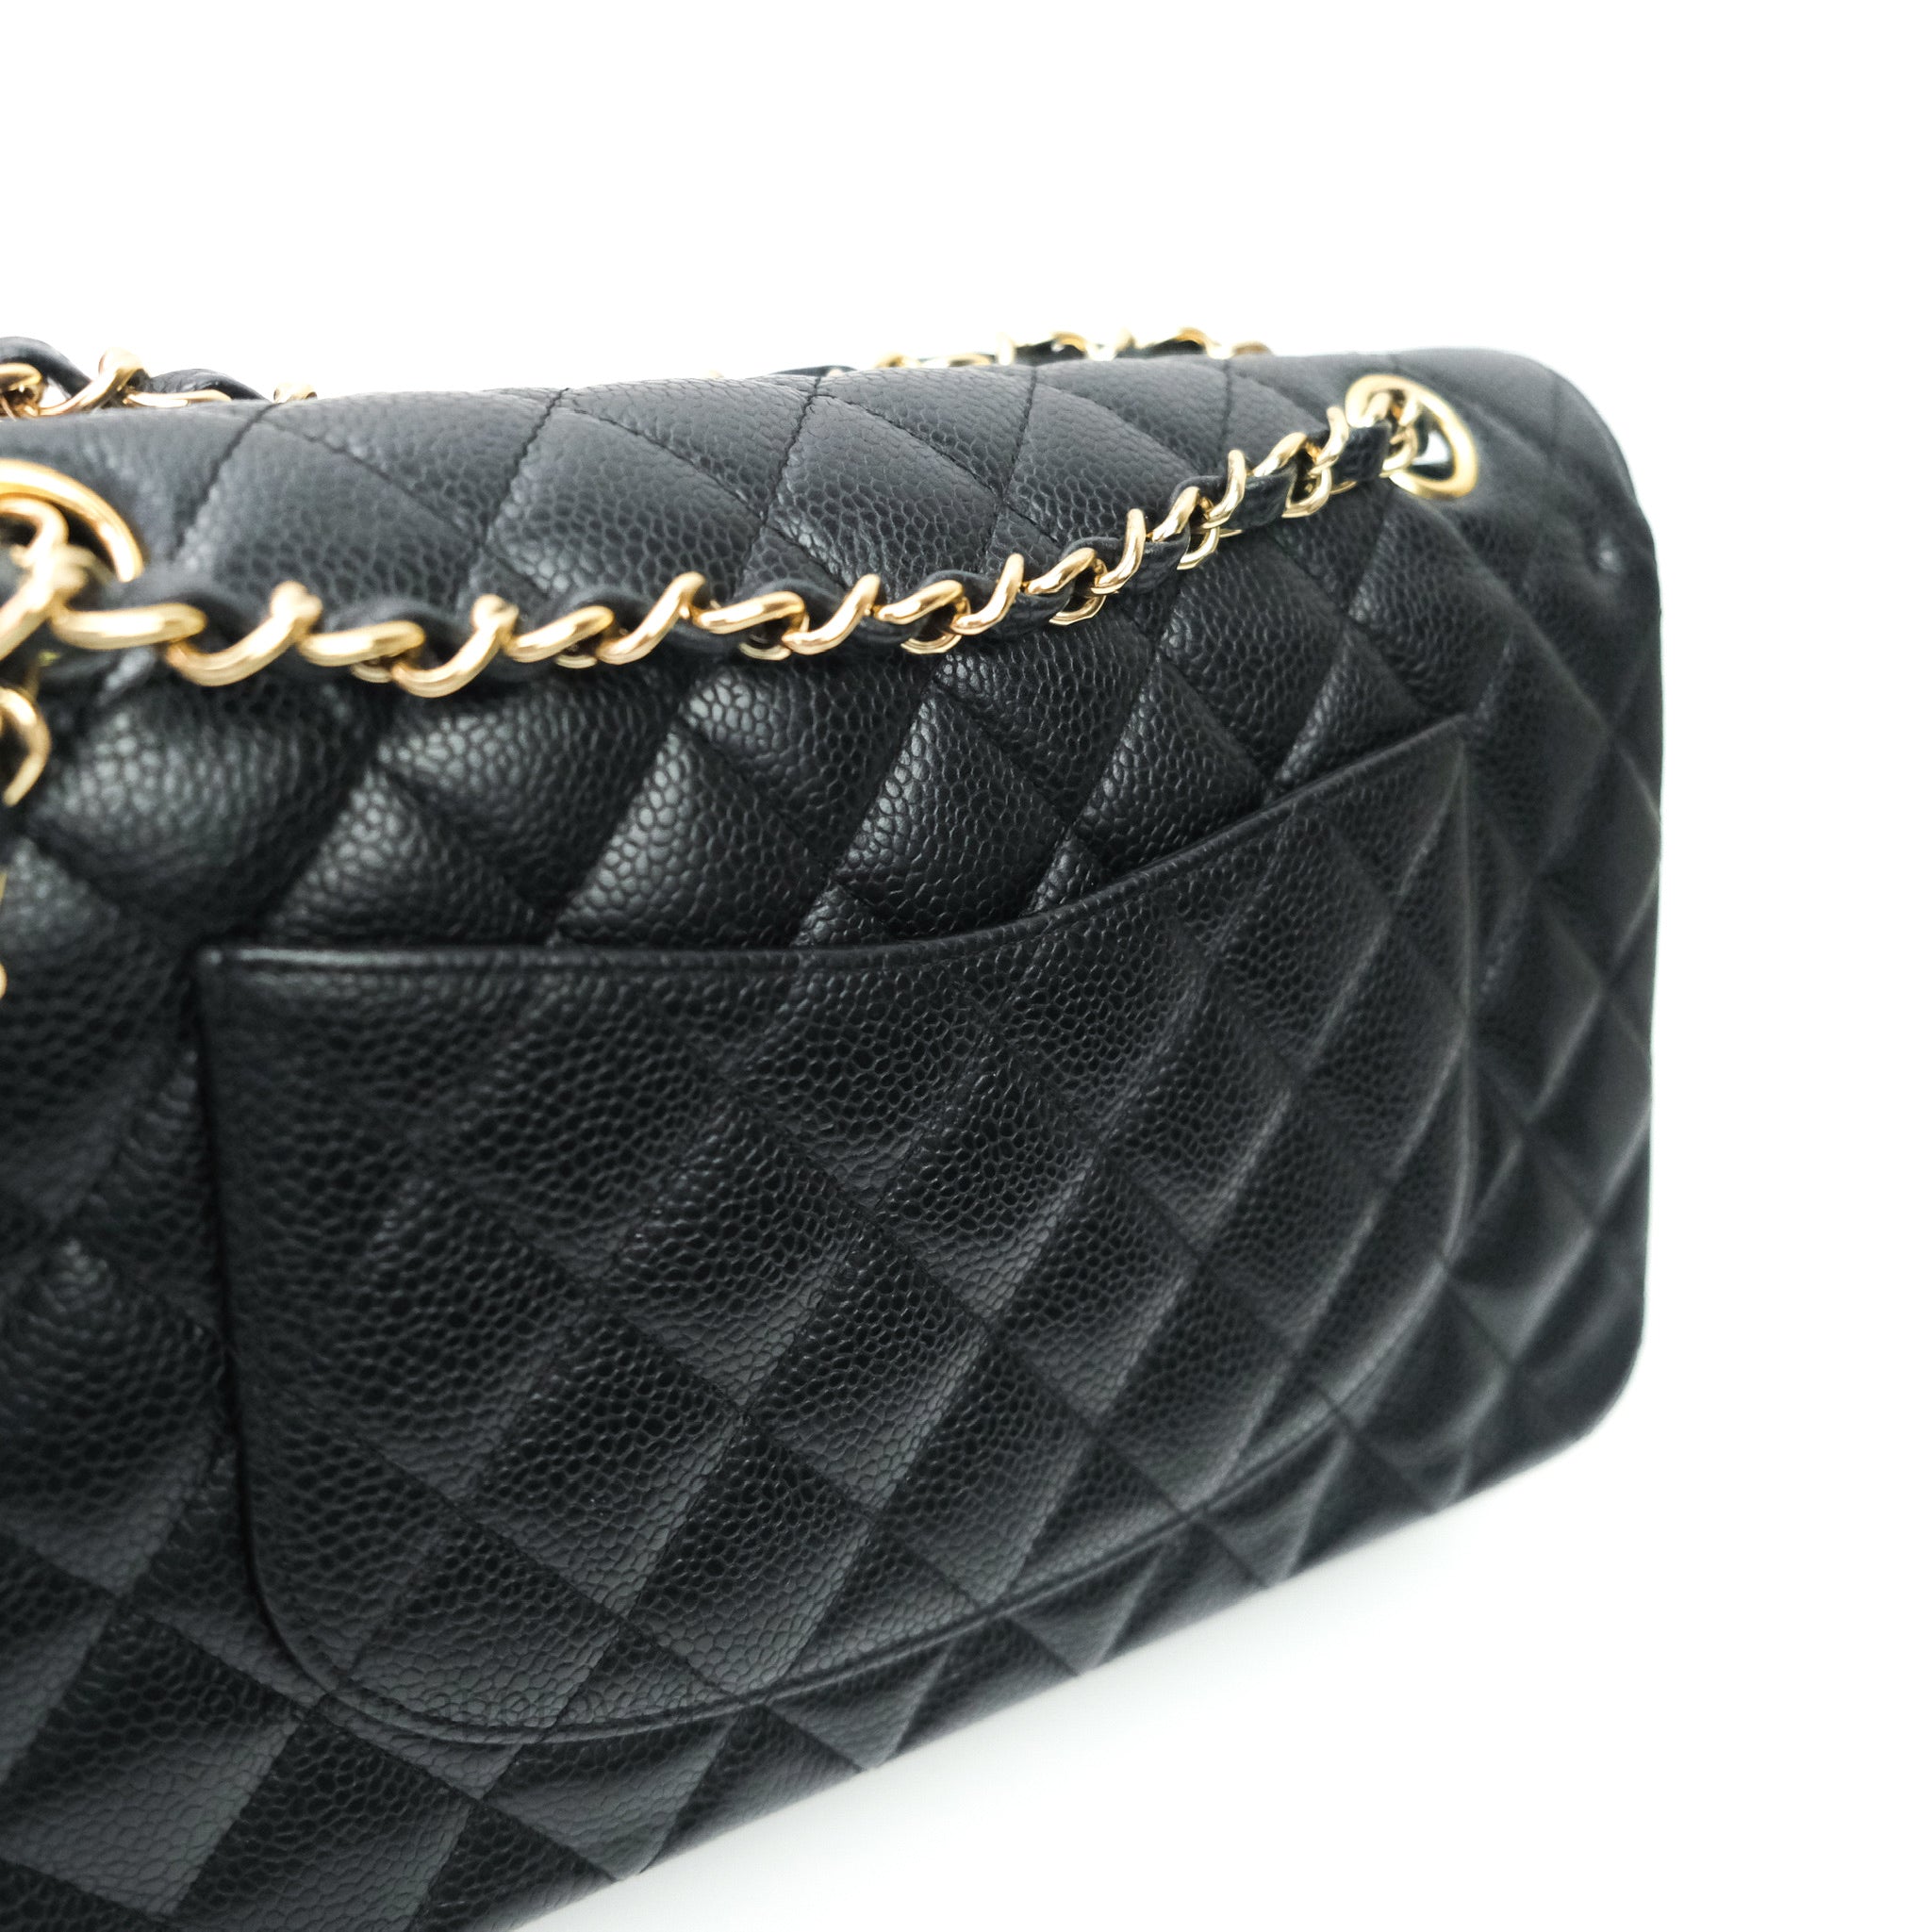 Chanel Quilted Maxi Classic Double Flap Bag of Black Caviar Leather with  Gold Hardware  Handbags and Accessories Online  Ecommerce Retail   Sothebys